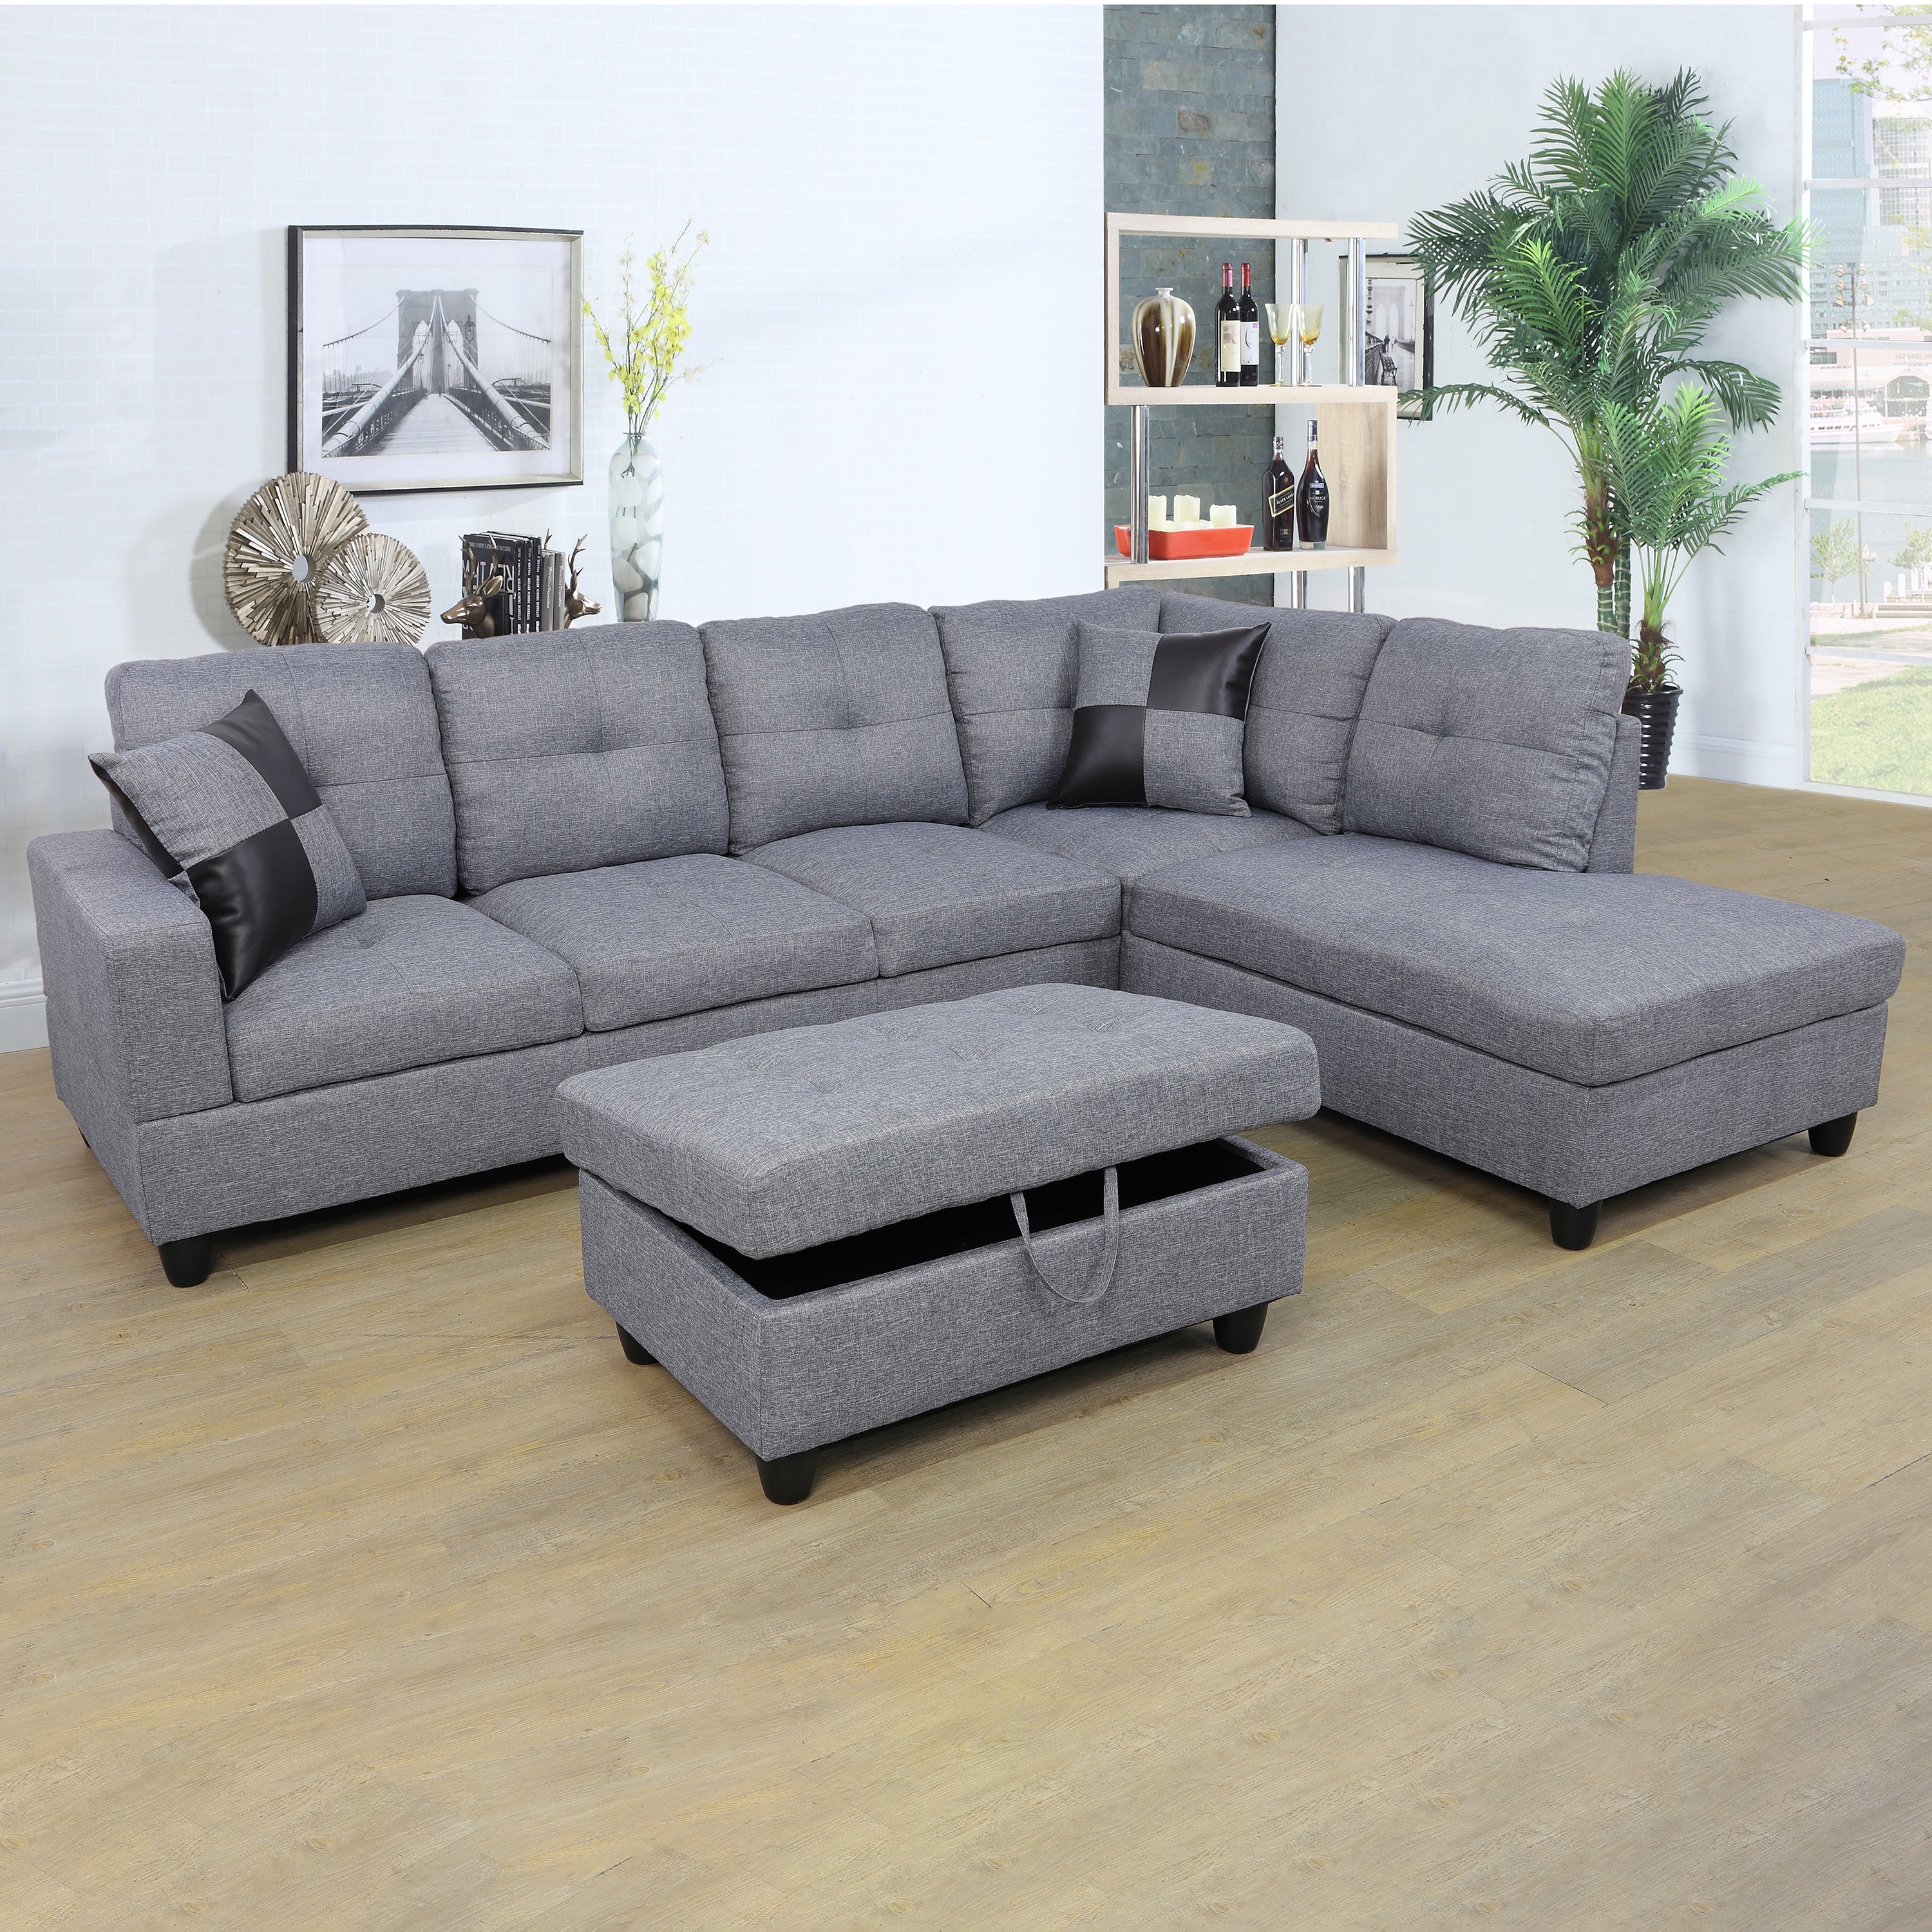 Ainehome Grey Linen 3-Piece Couch Living Room Sofa Set